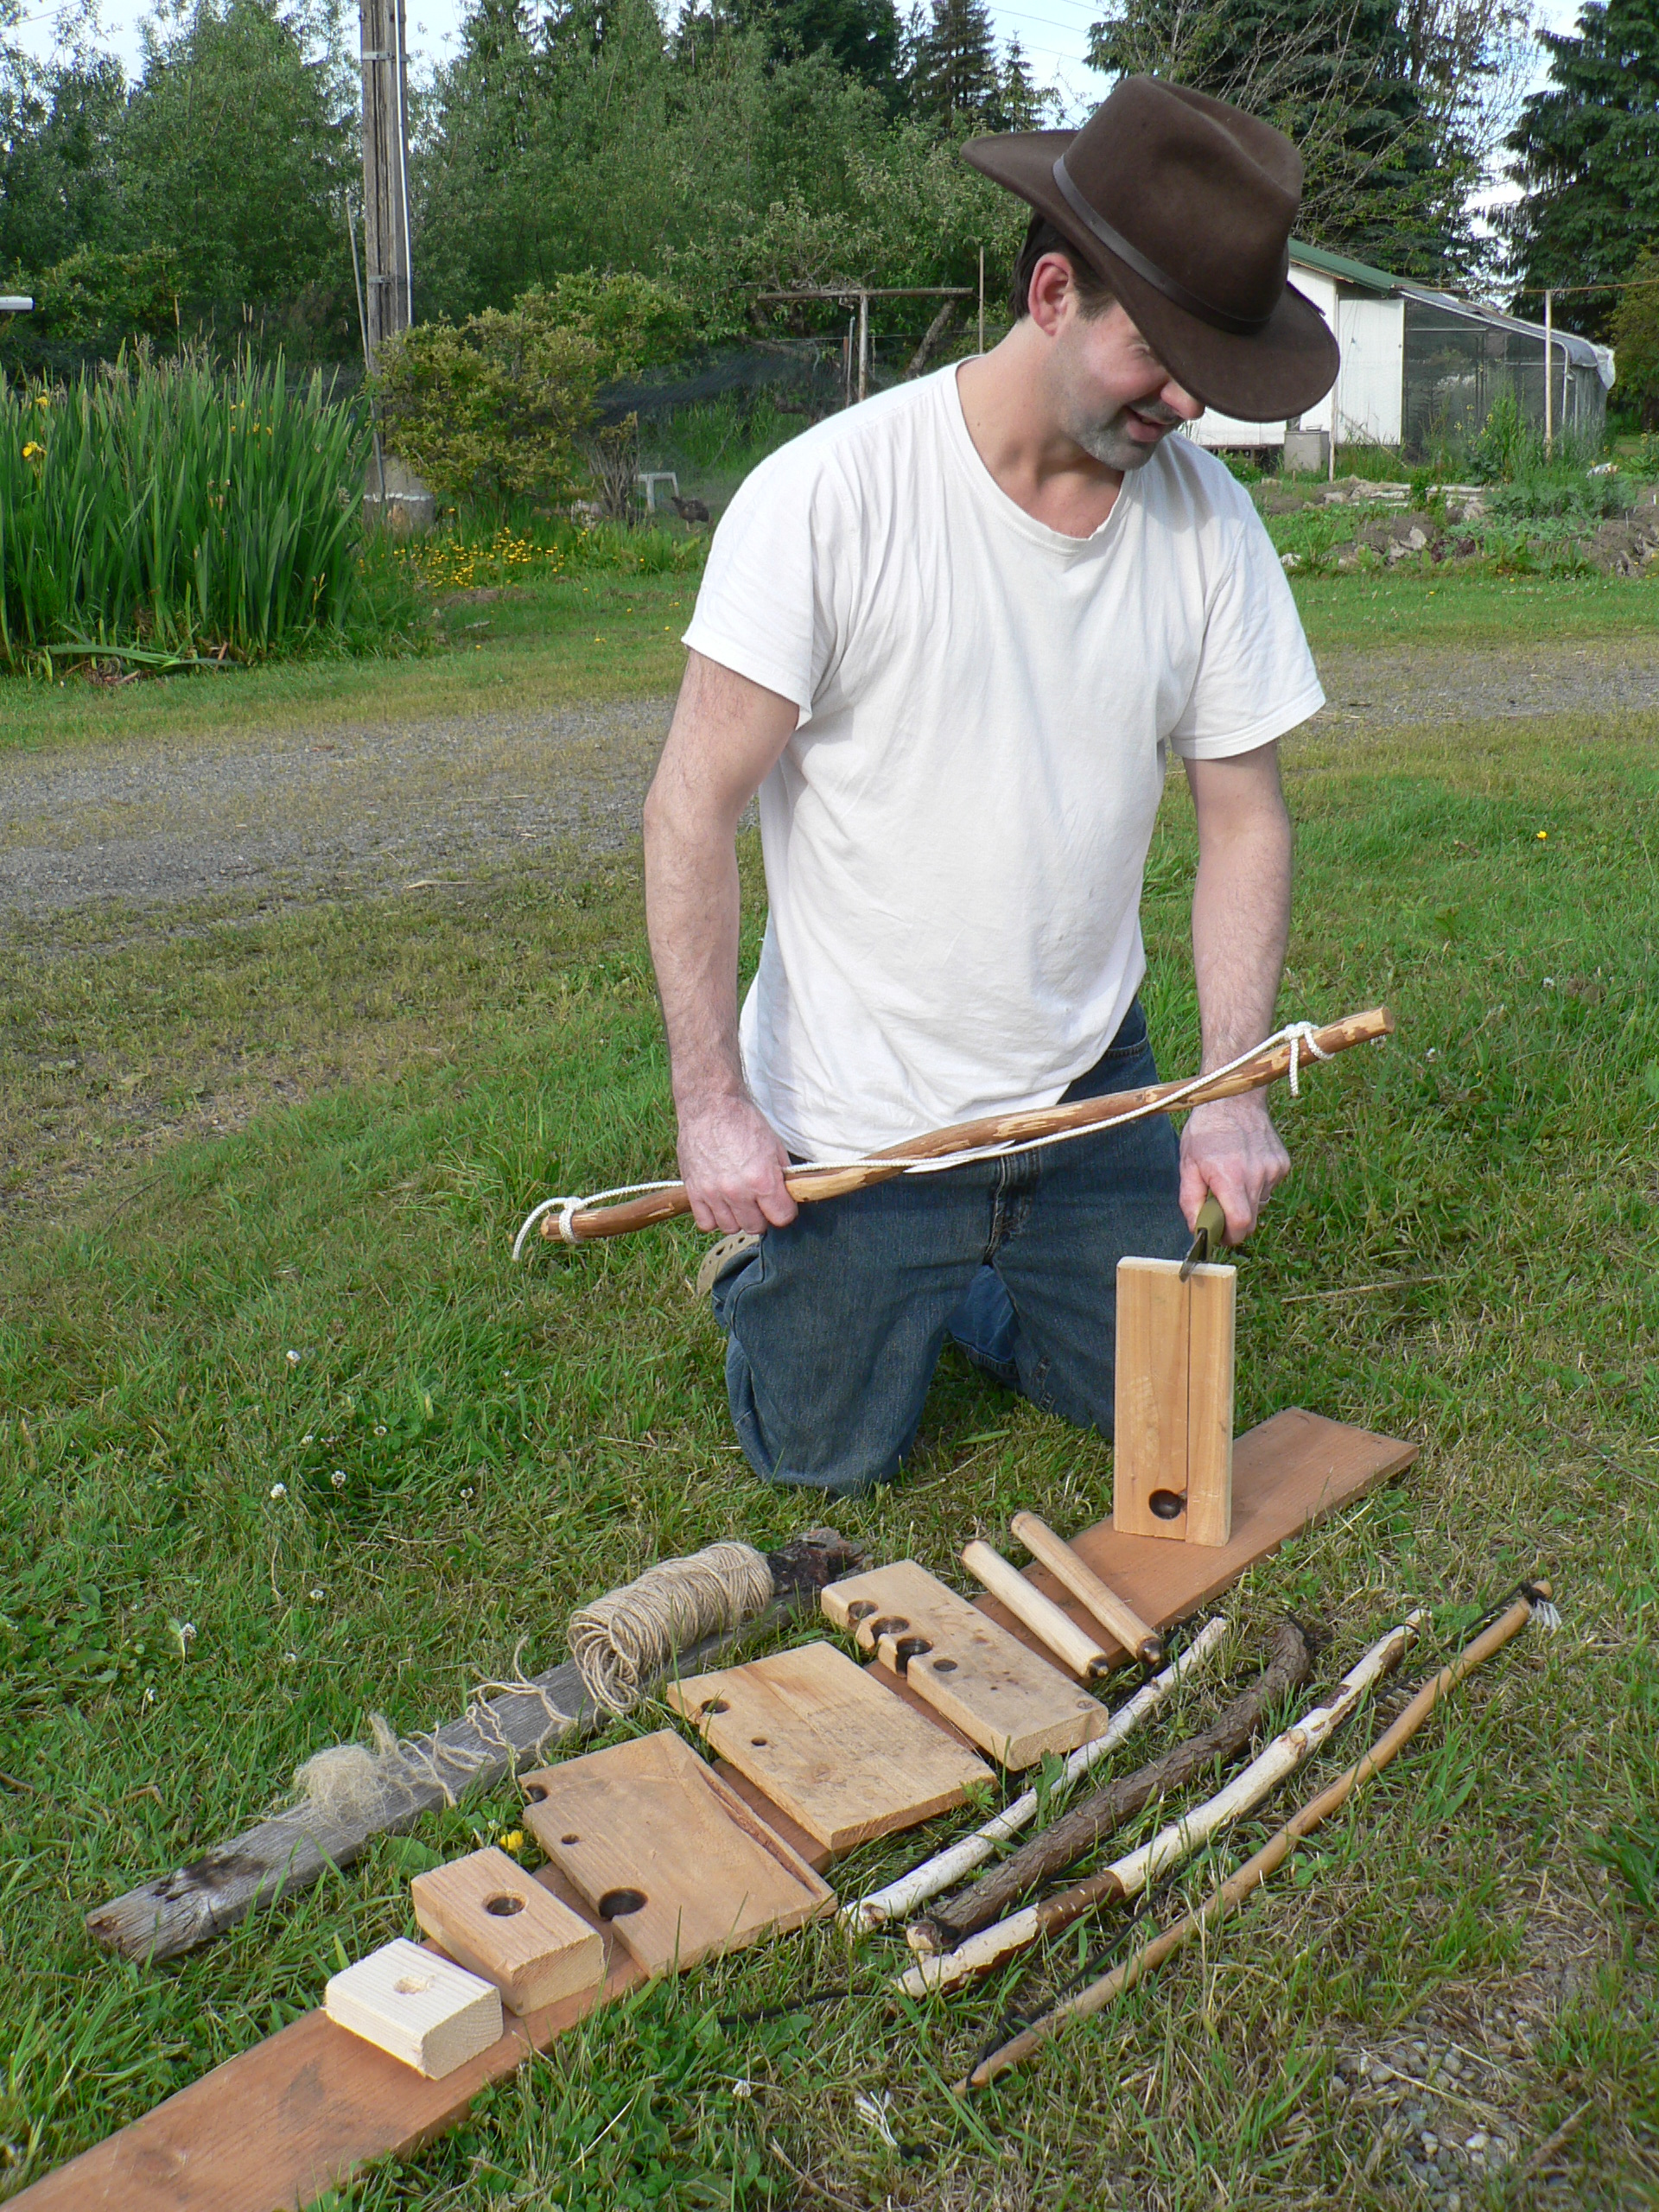 Chris Chisholm with a display of Bow Drill Kit Pieces